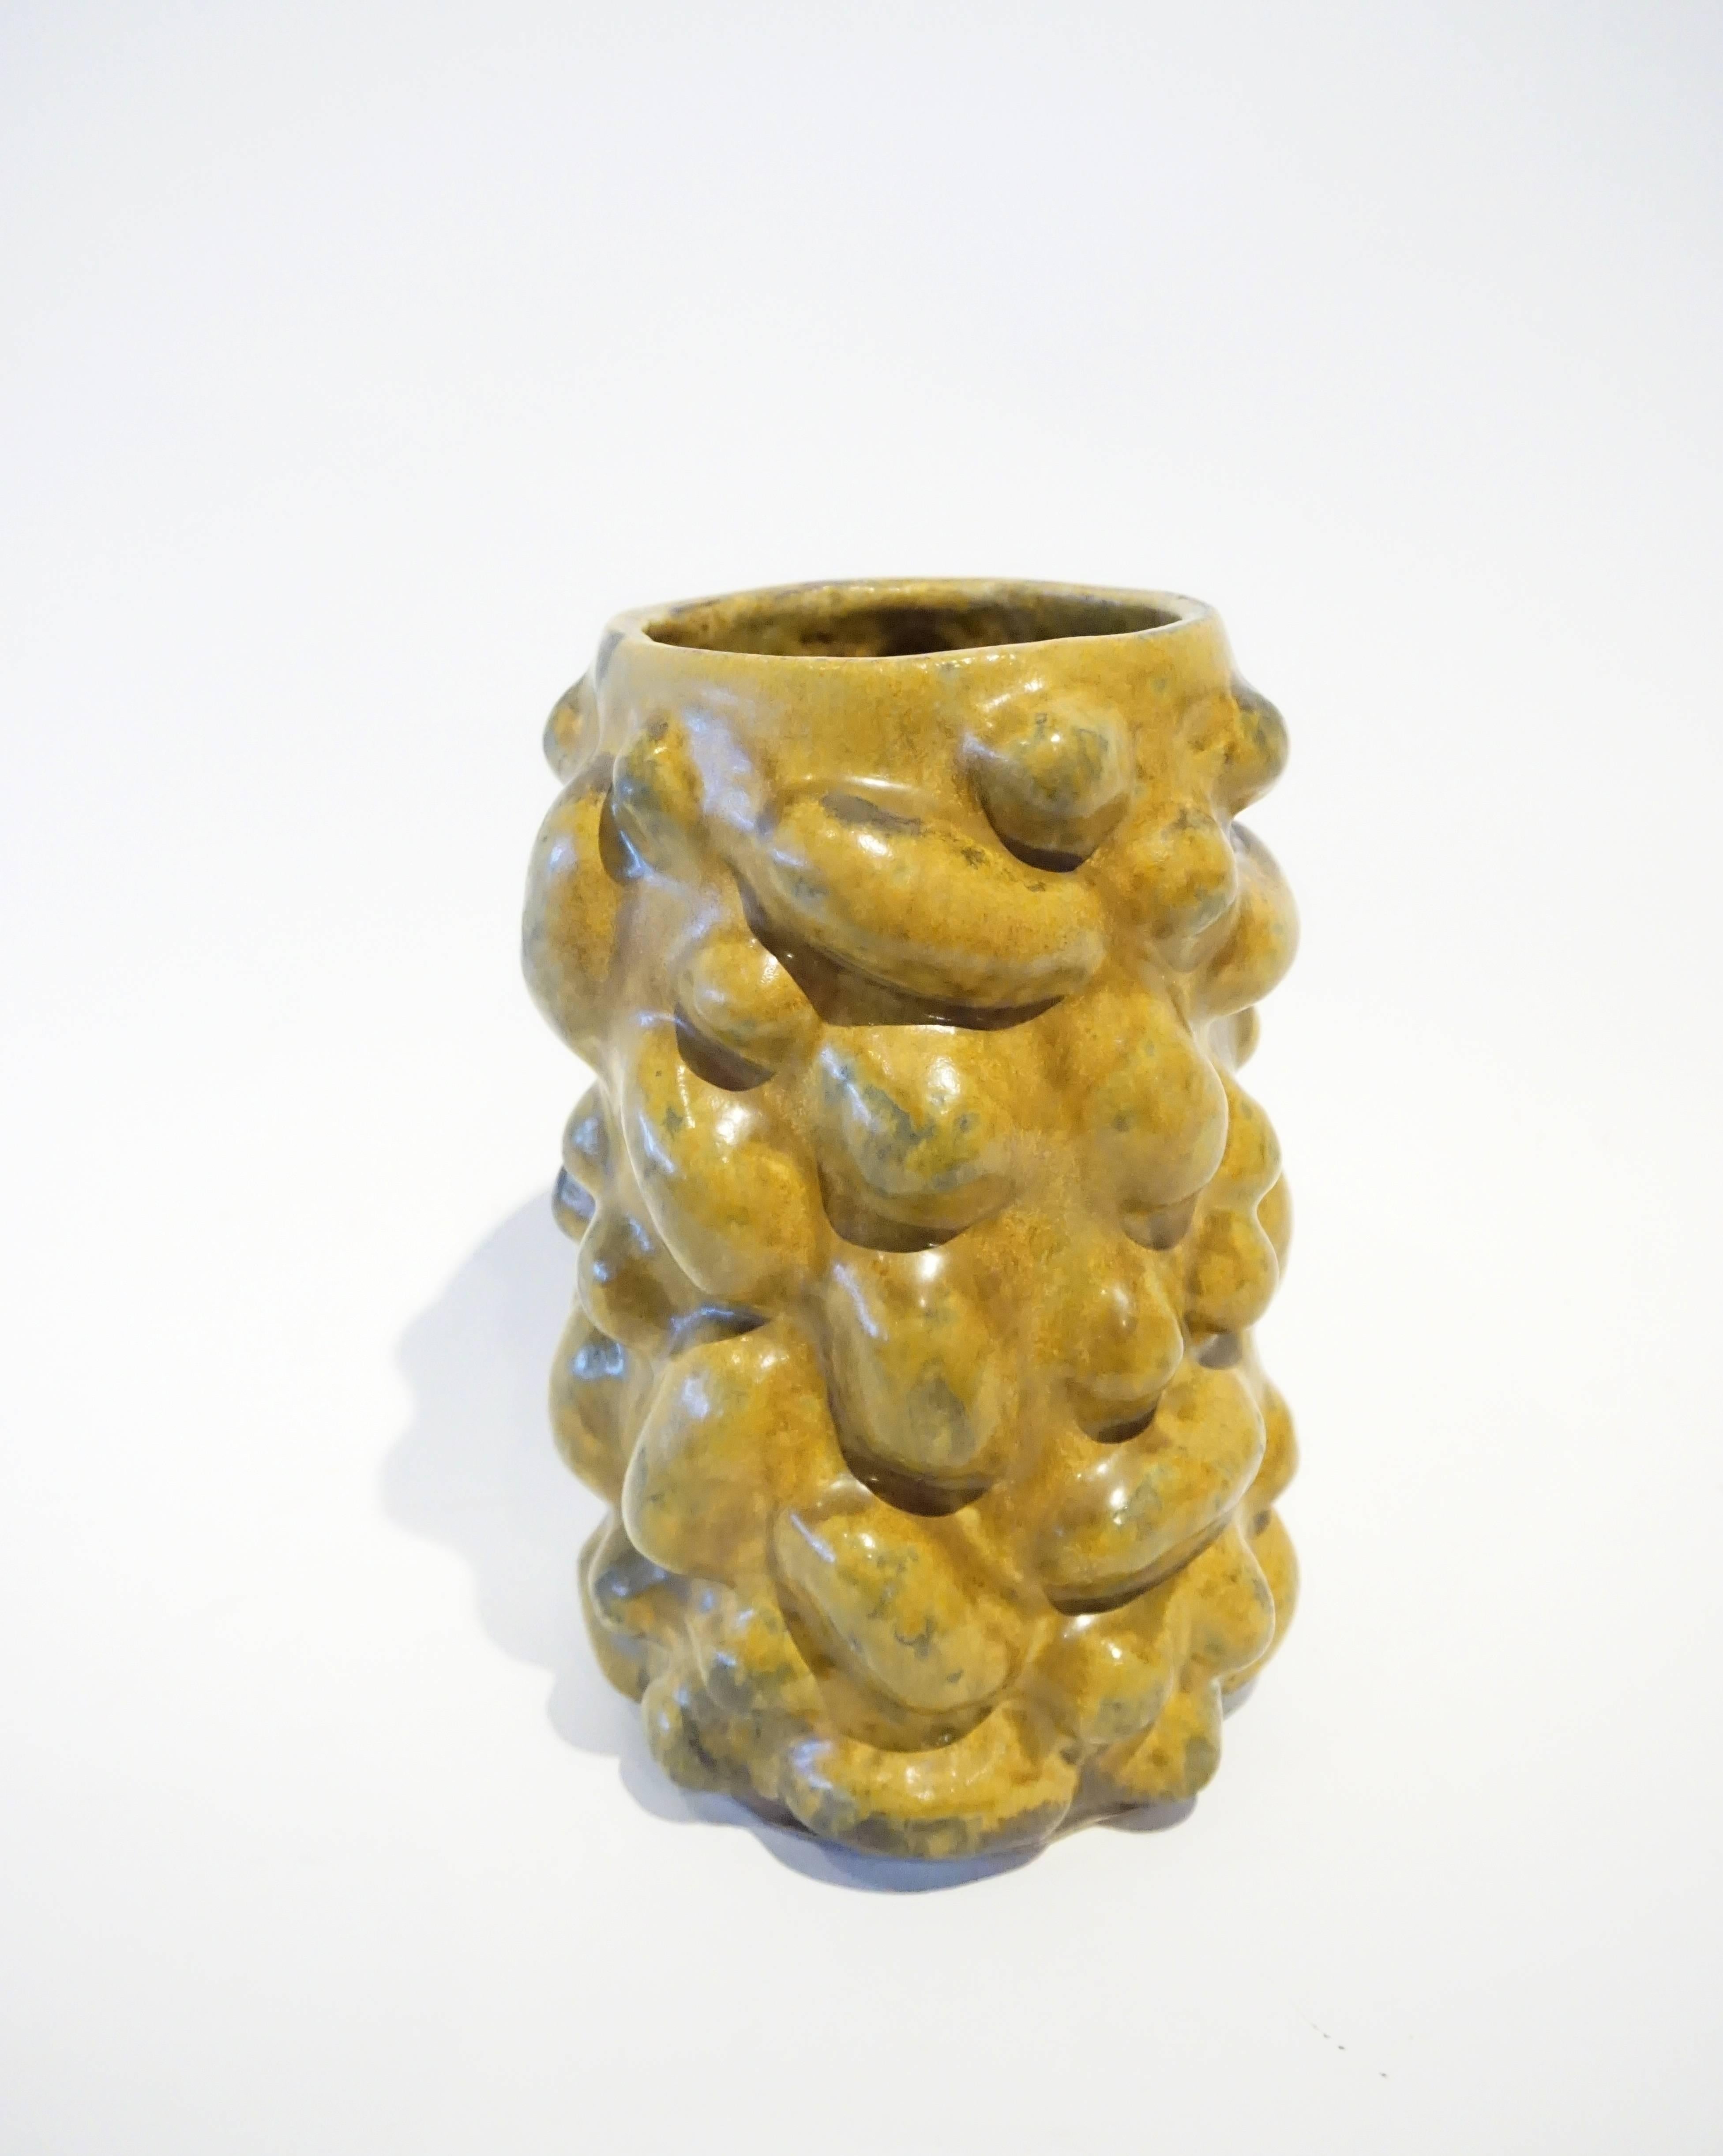 A glazed ceramic vessel by American studio potter Warner Walcott. C. 2016.  The formed stoneware vessel is finished in a semi-gloss mustard colored glaze and exhibits the influence of famed Mid-Century Danish artist, Axel Salto.